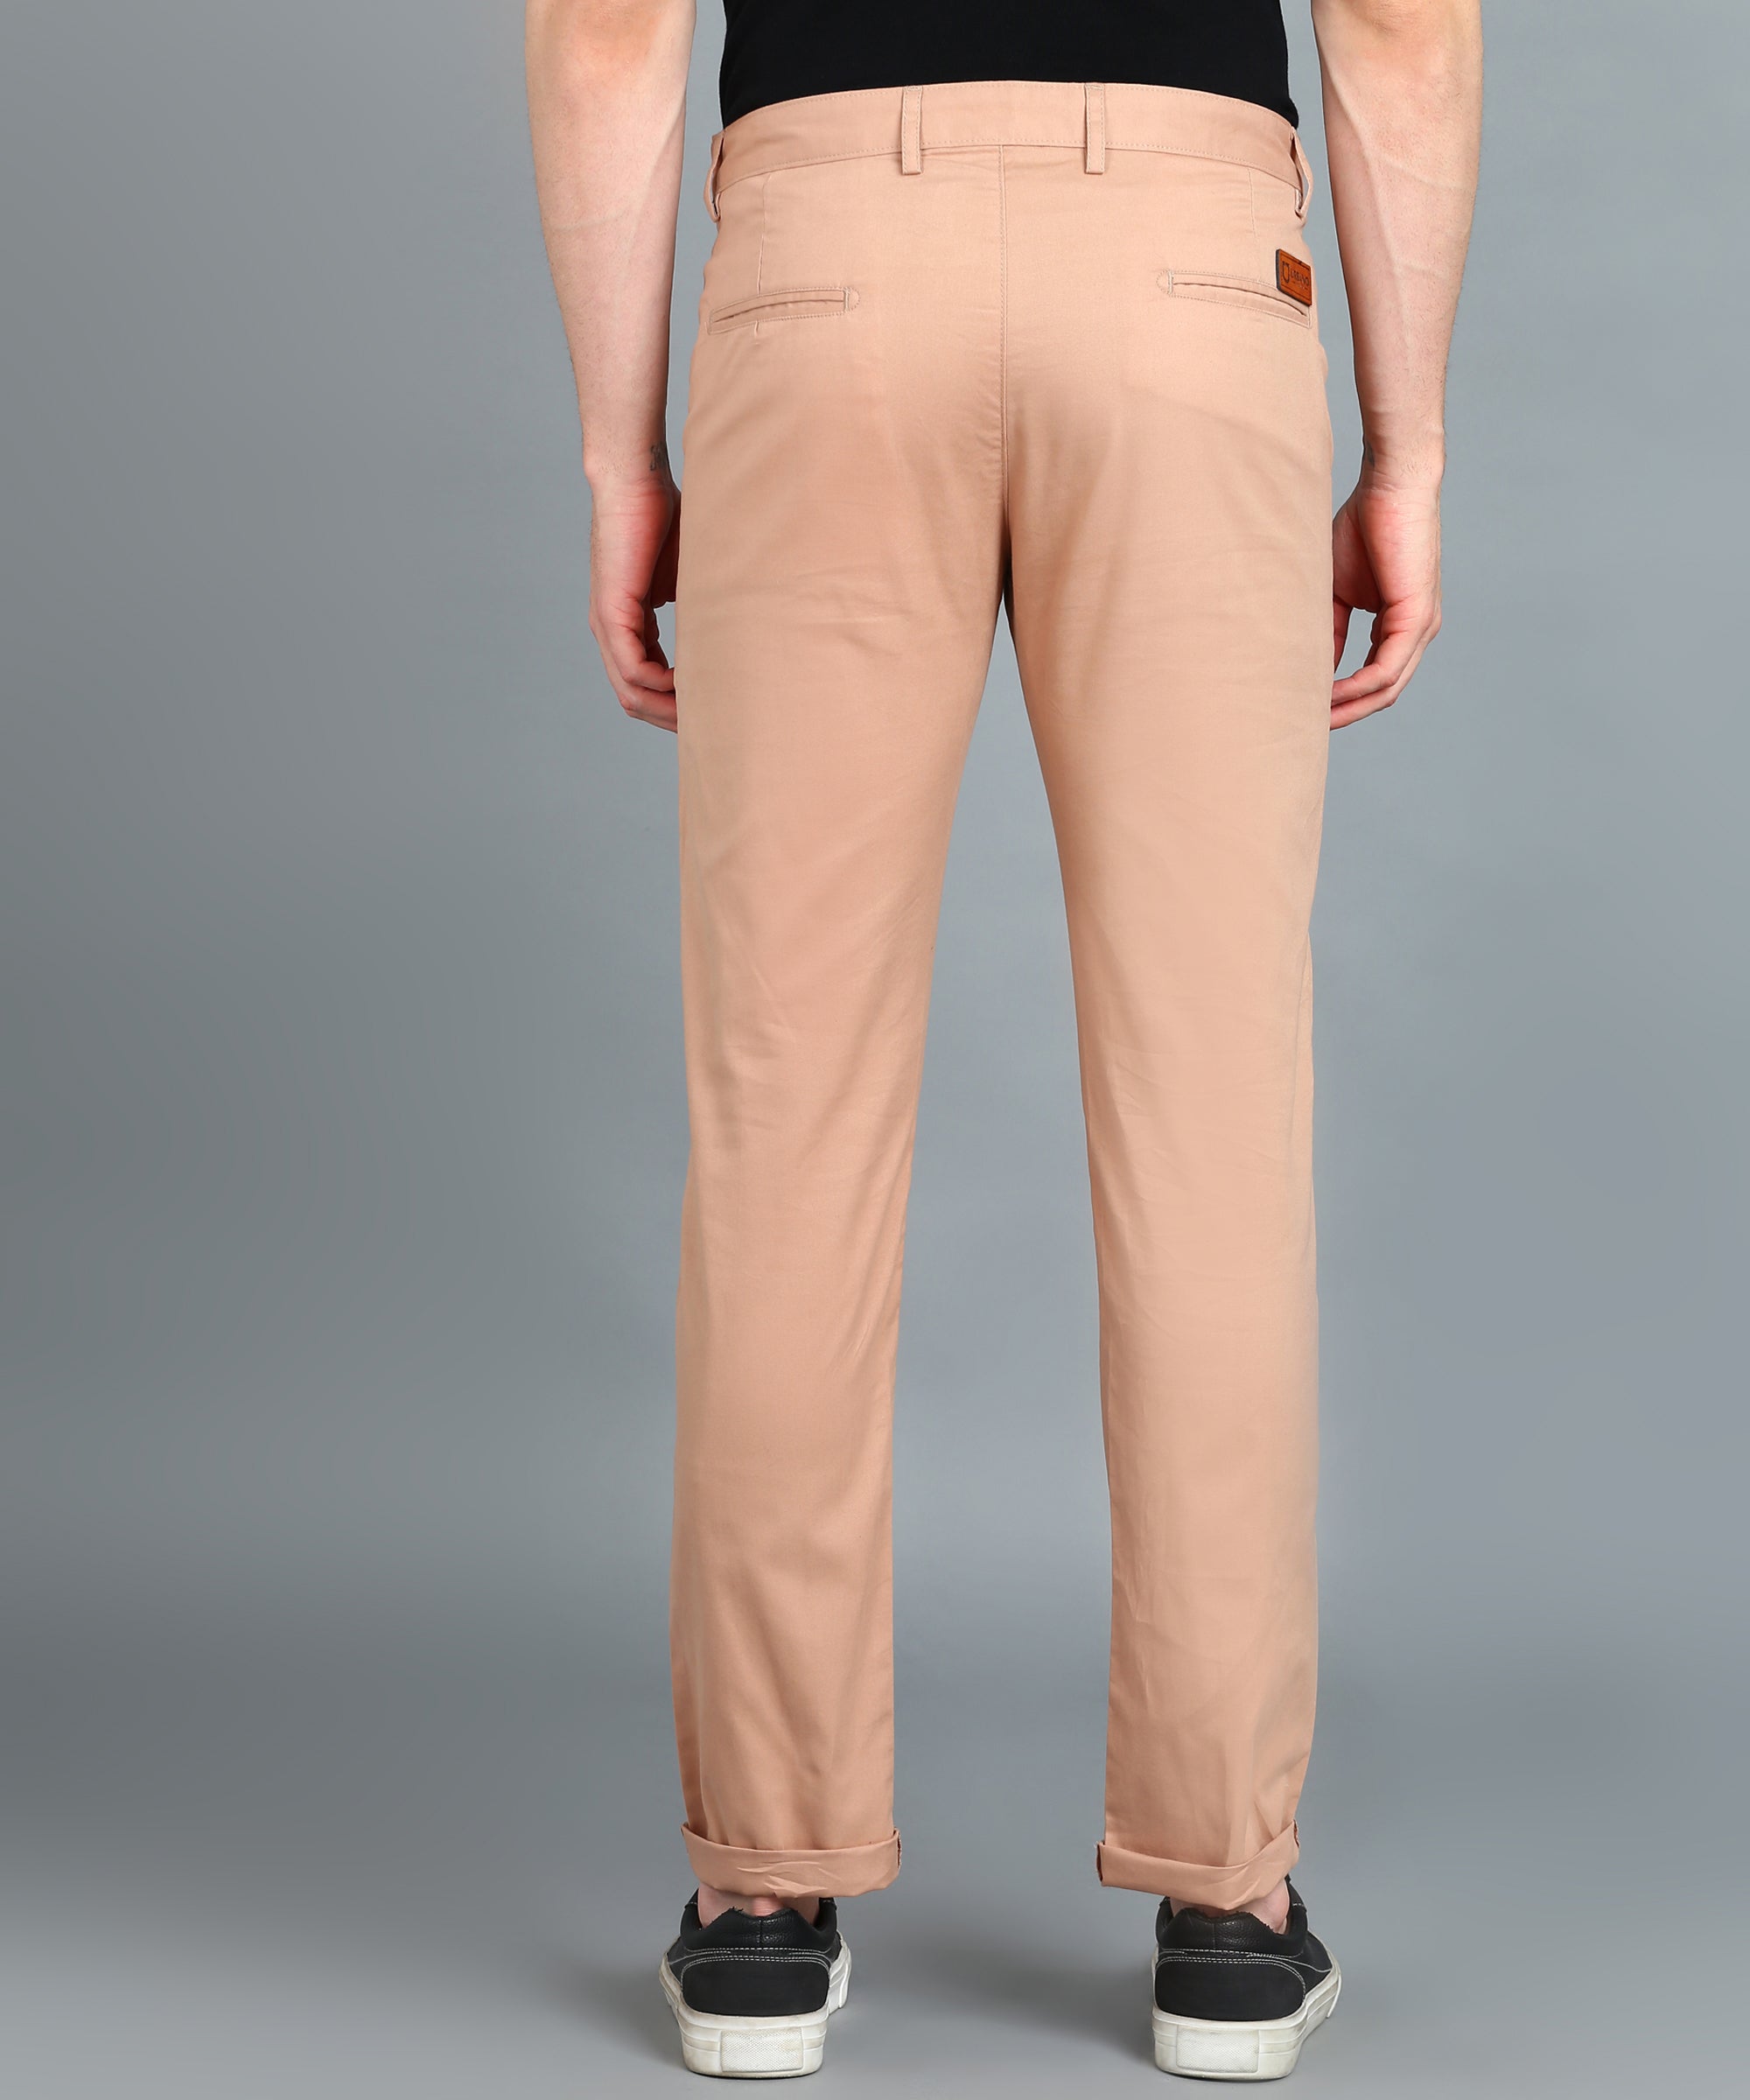 Men's Purple Cotton Light Weight Non-Stretch Slim Fit Casual Trousers